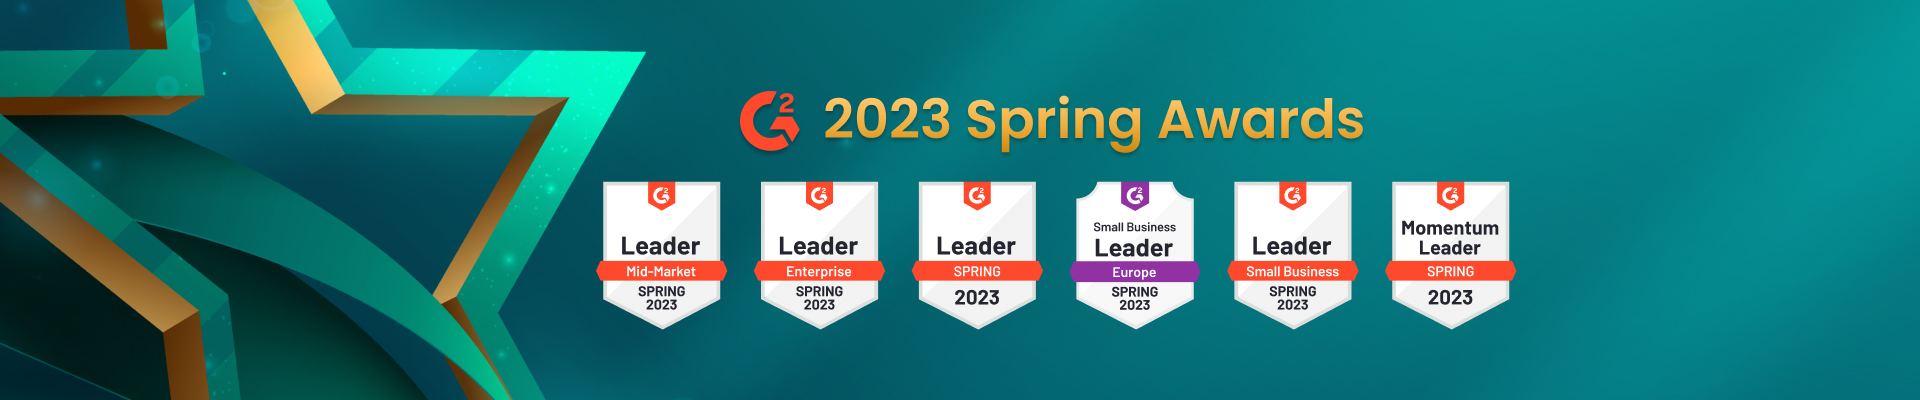 Jobma: The Leader in Digital Interviewing Technology - Recognized by G2 Spring 2023 Report